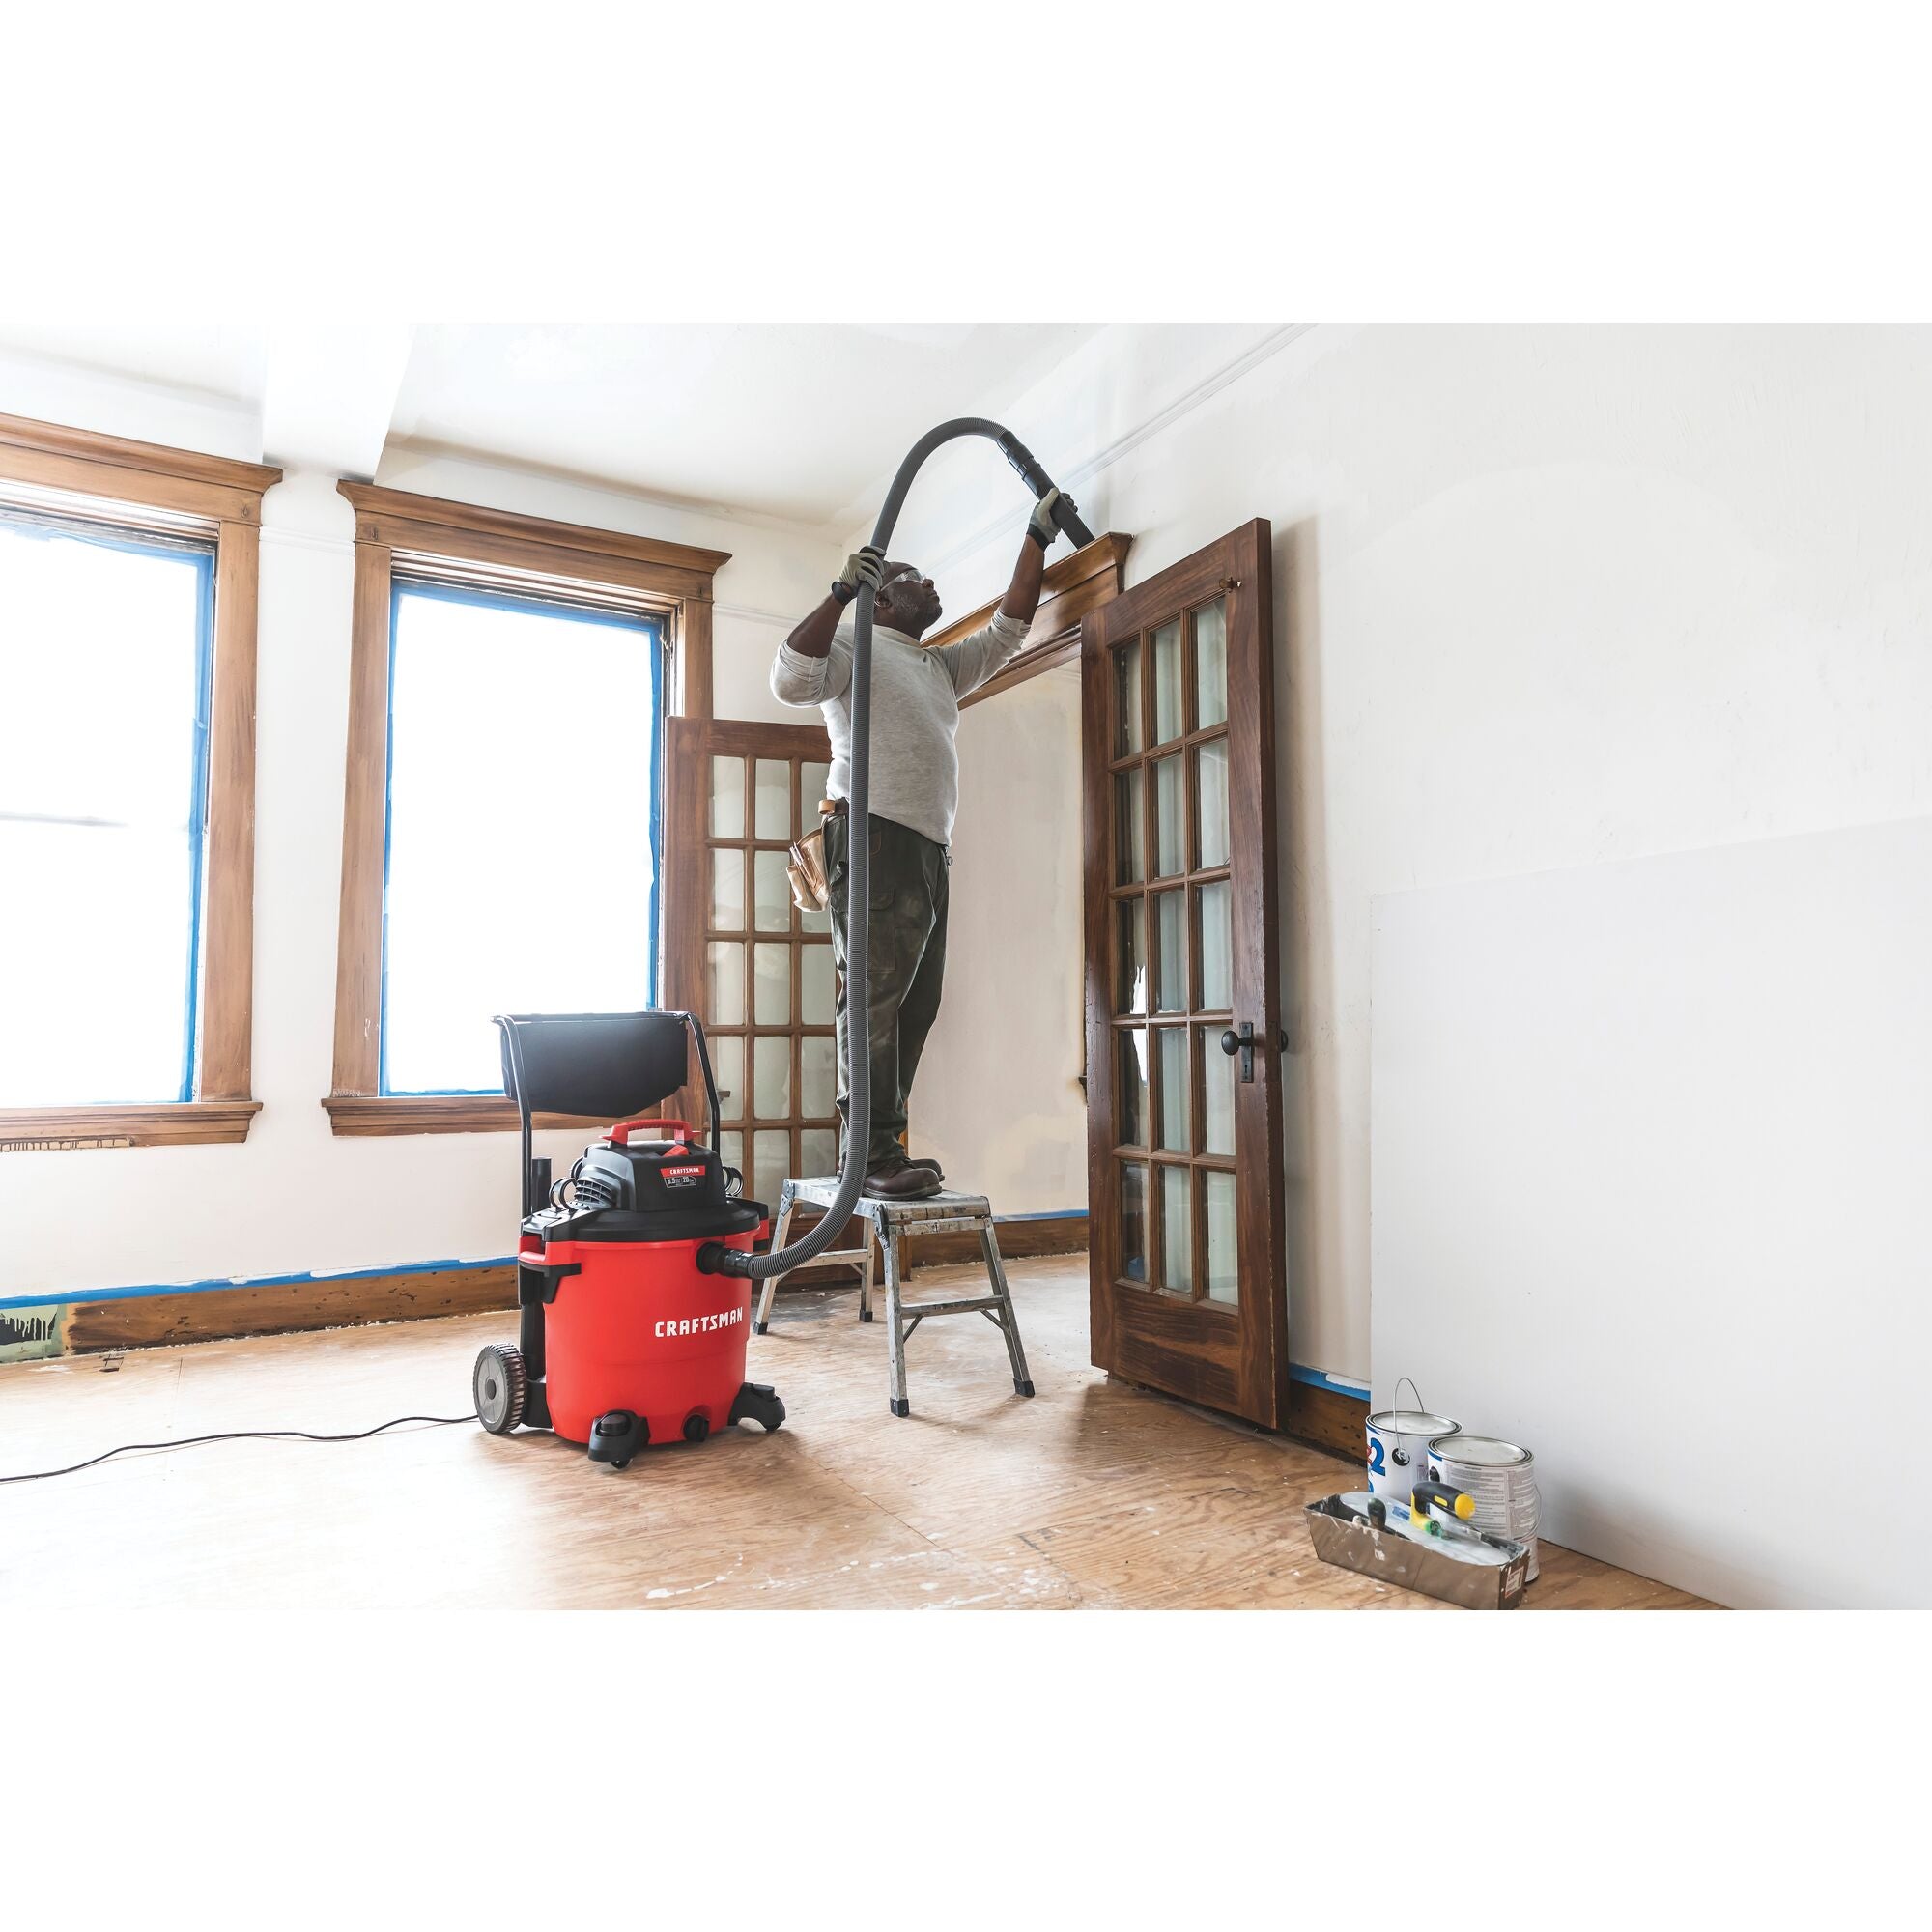 20 gallon 6.5 H P wet dry vacuum with cart being used by a person to clean wooden door frame.